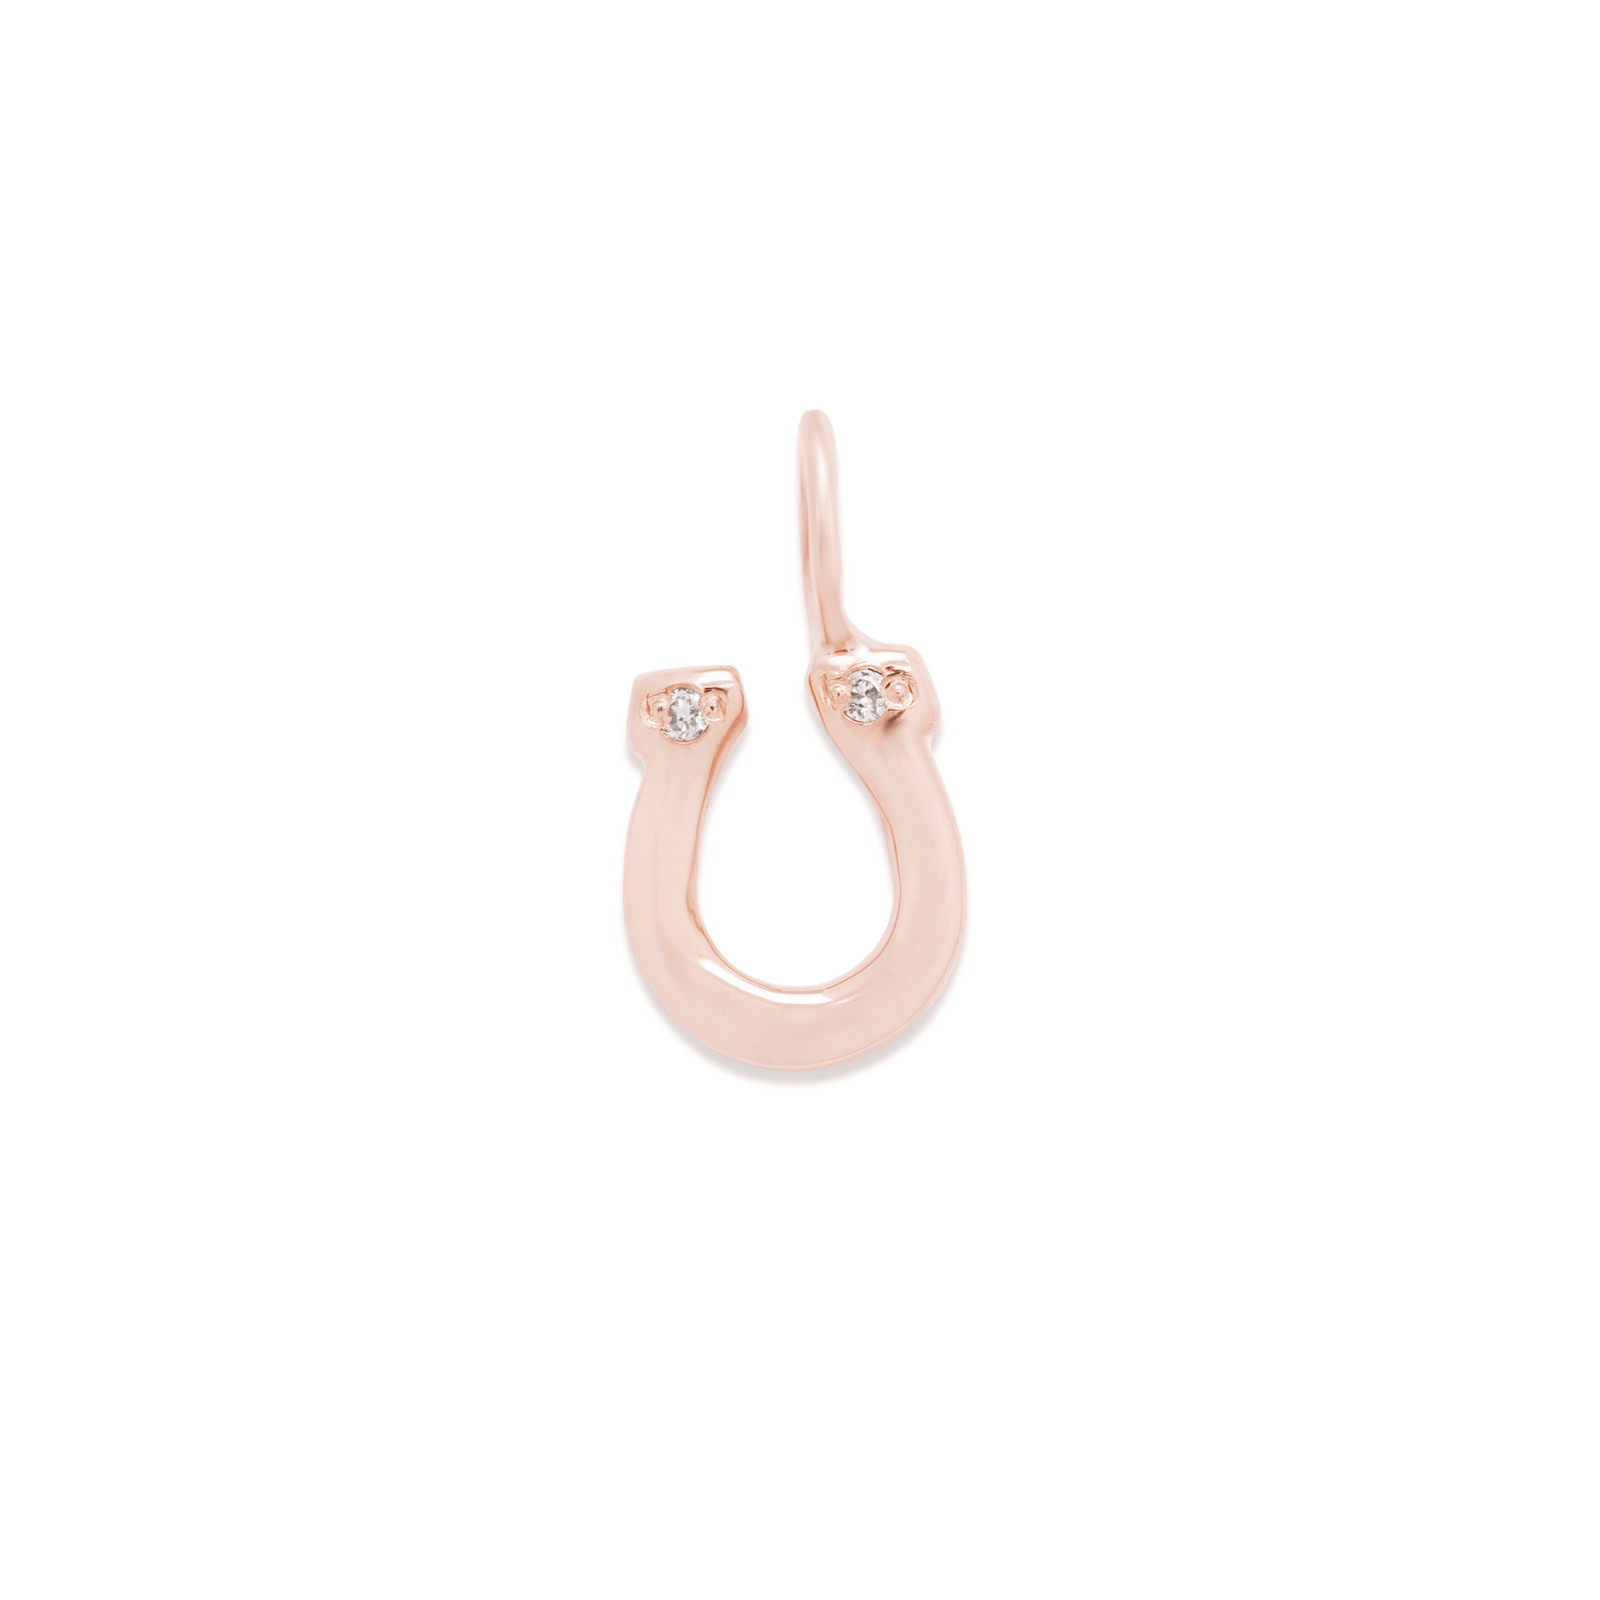 horseshoe charm necklace in 14k pink gold with diamonds or gemstones